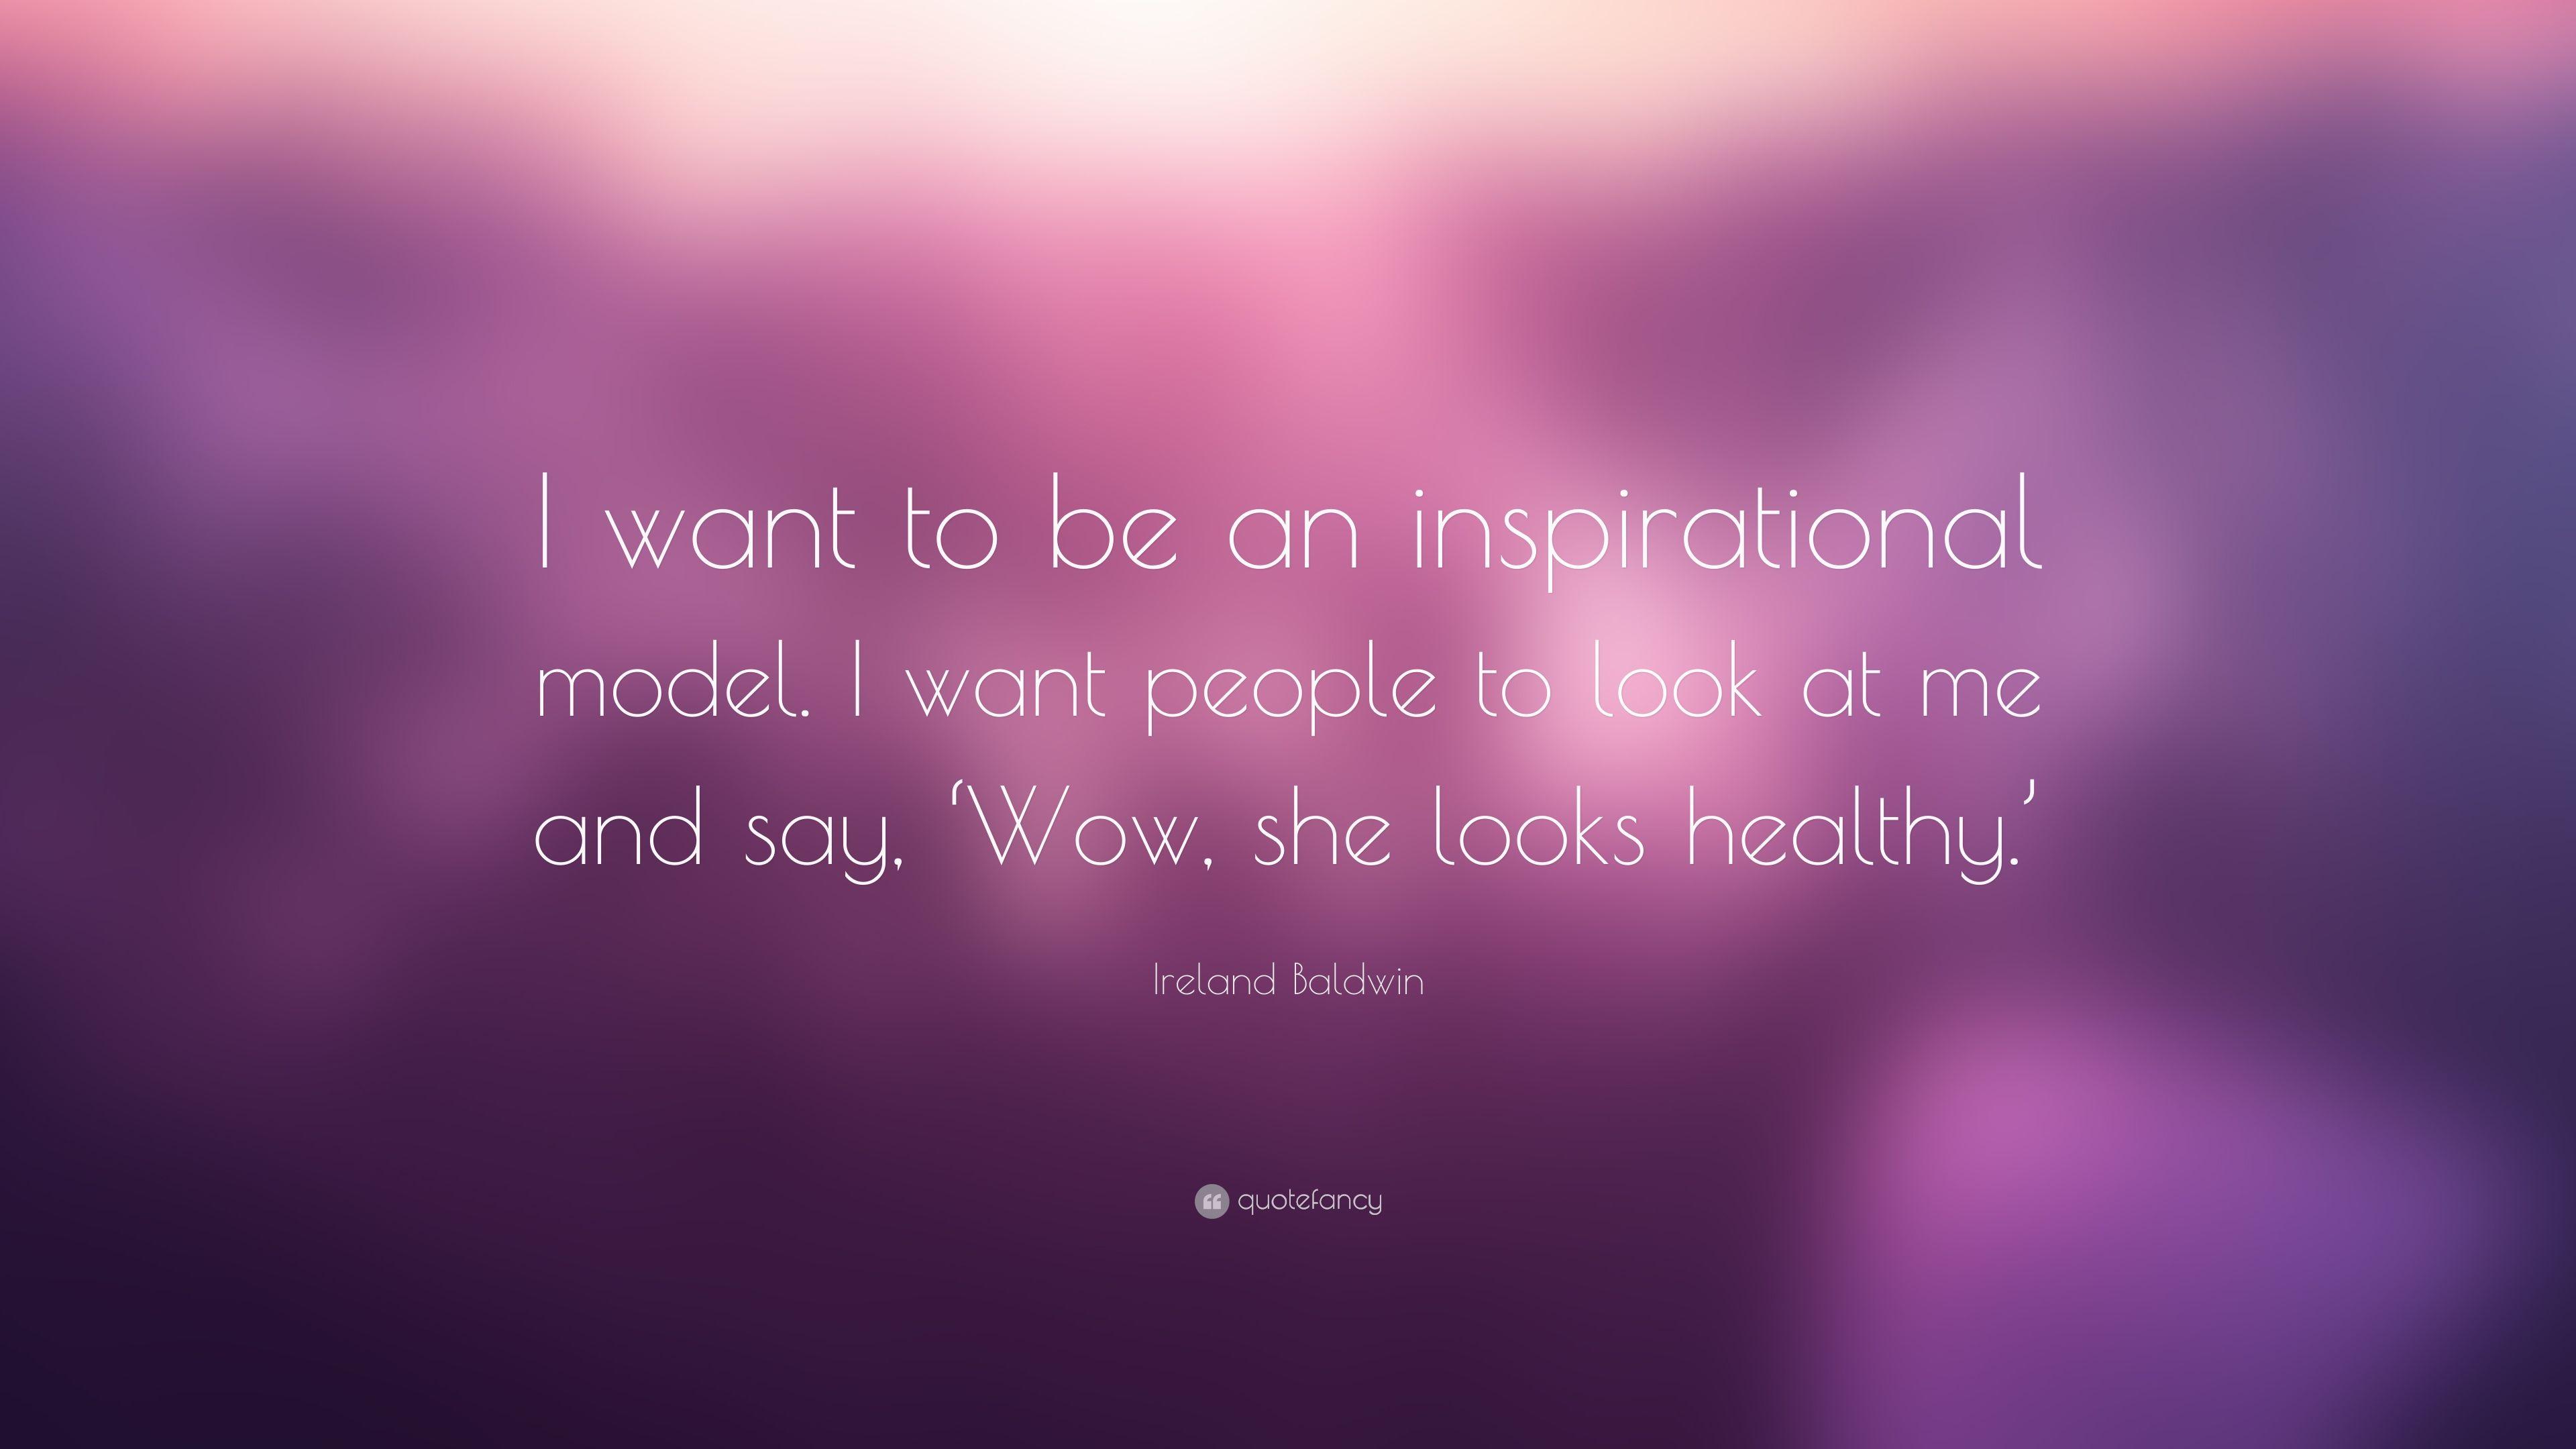 Ireland Baldwin Quote: “I want to be an inspirational model. I want